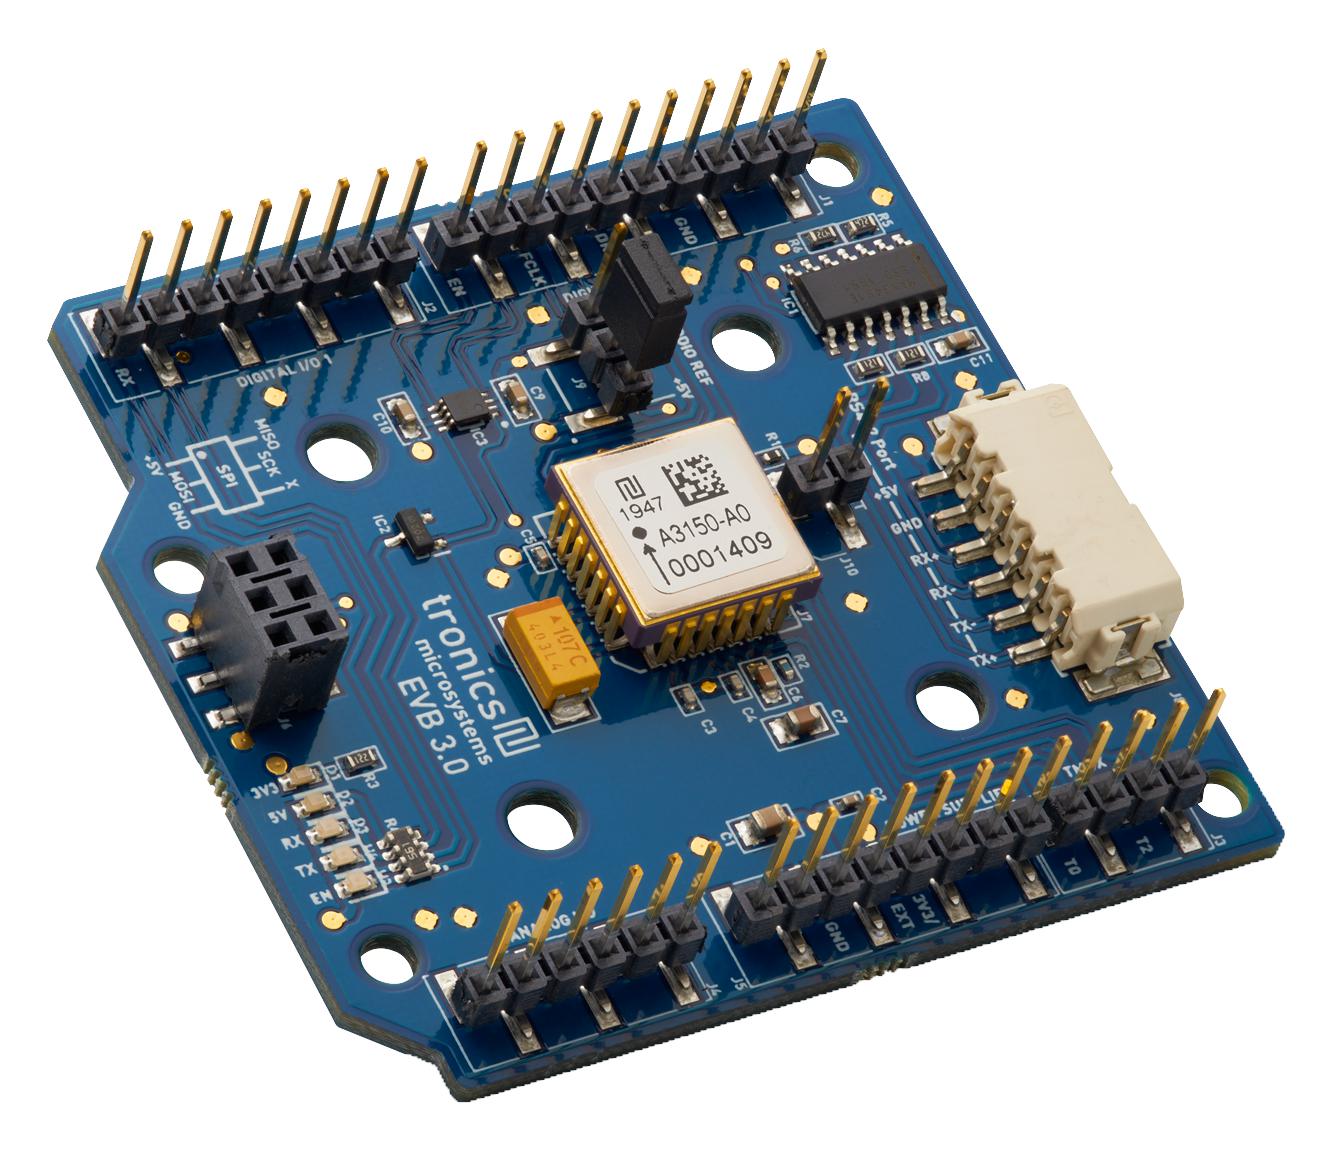 4-A3150-A0 EVAL BOARD, 1-AXIS ACCELEROMETER TRONICS